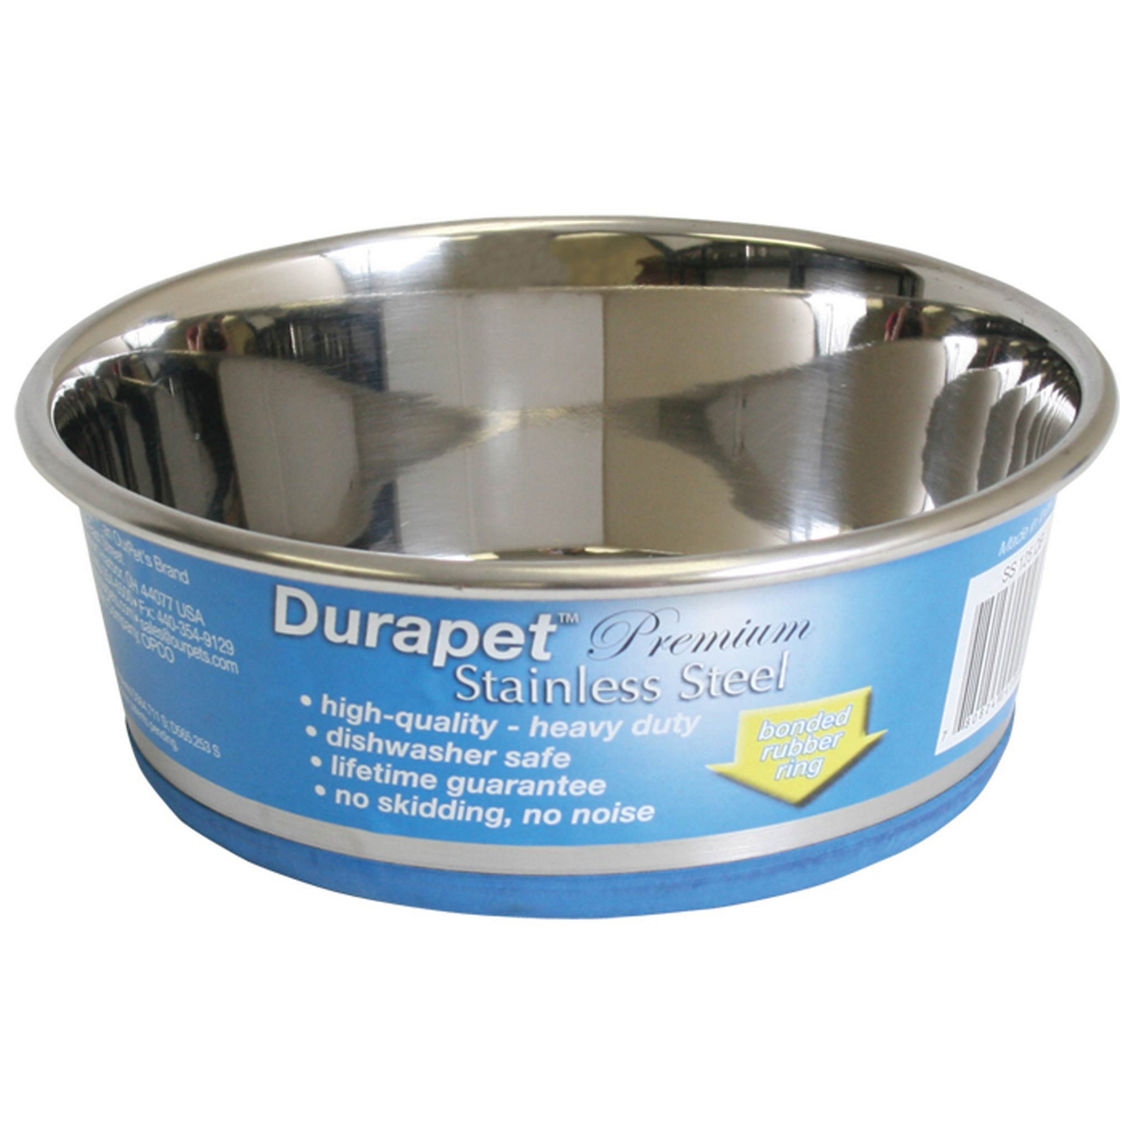 Our Pet's Durapet Premium Rubber Bonded Stainless Steel Dog Bowl ...